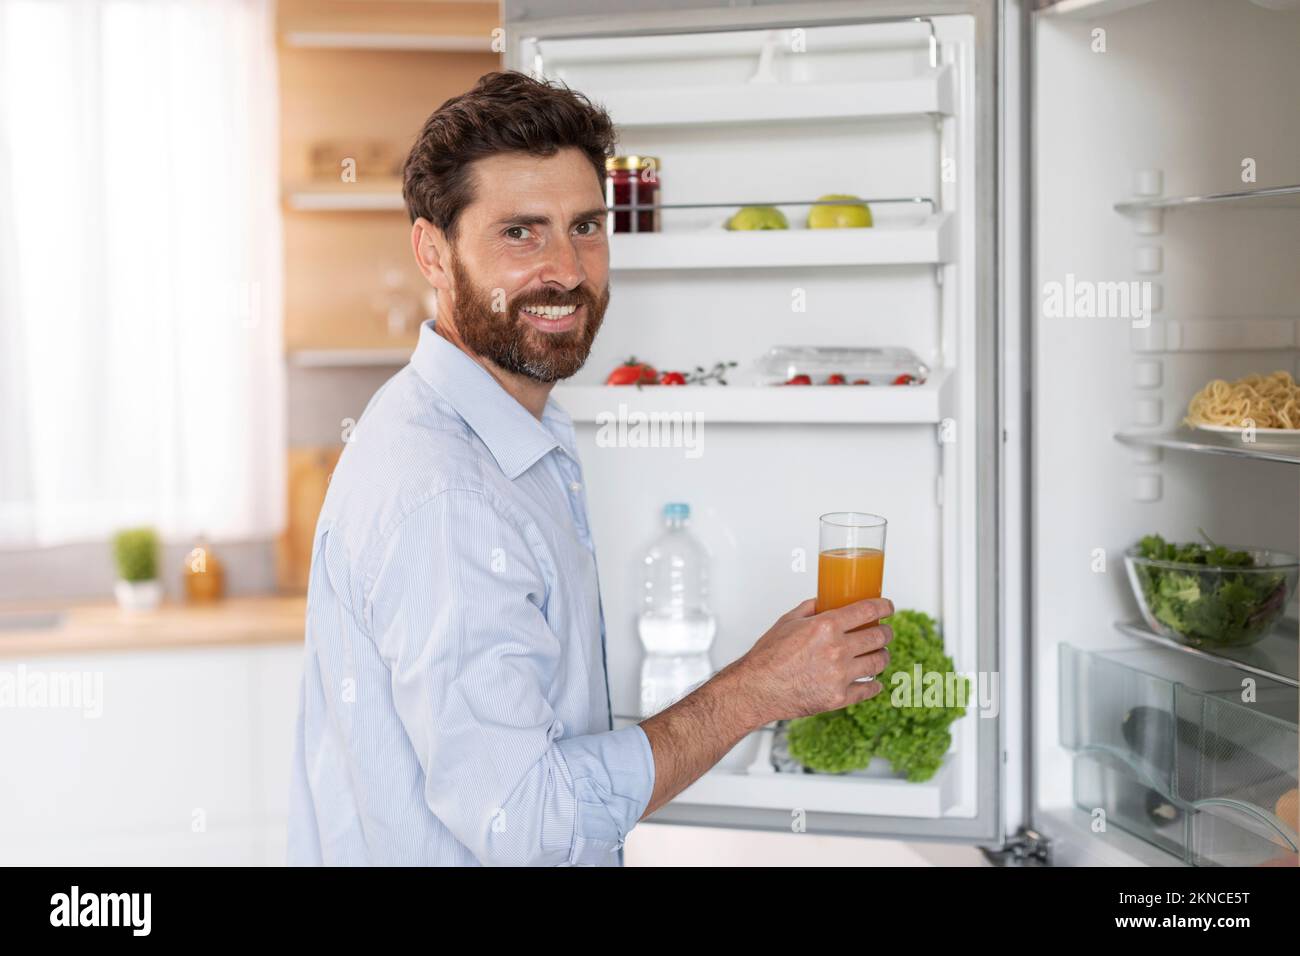 Happy handsome adult caucasian man with beard in shirt opens refrigerator door, takes glass of juice Stock Photo